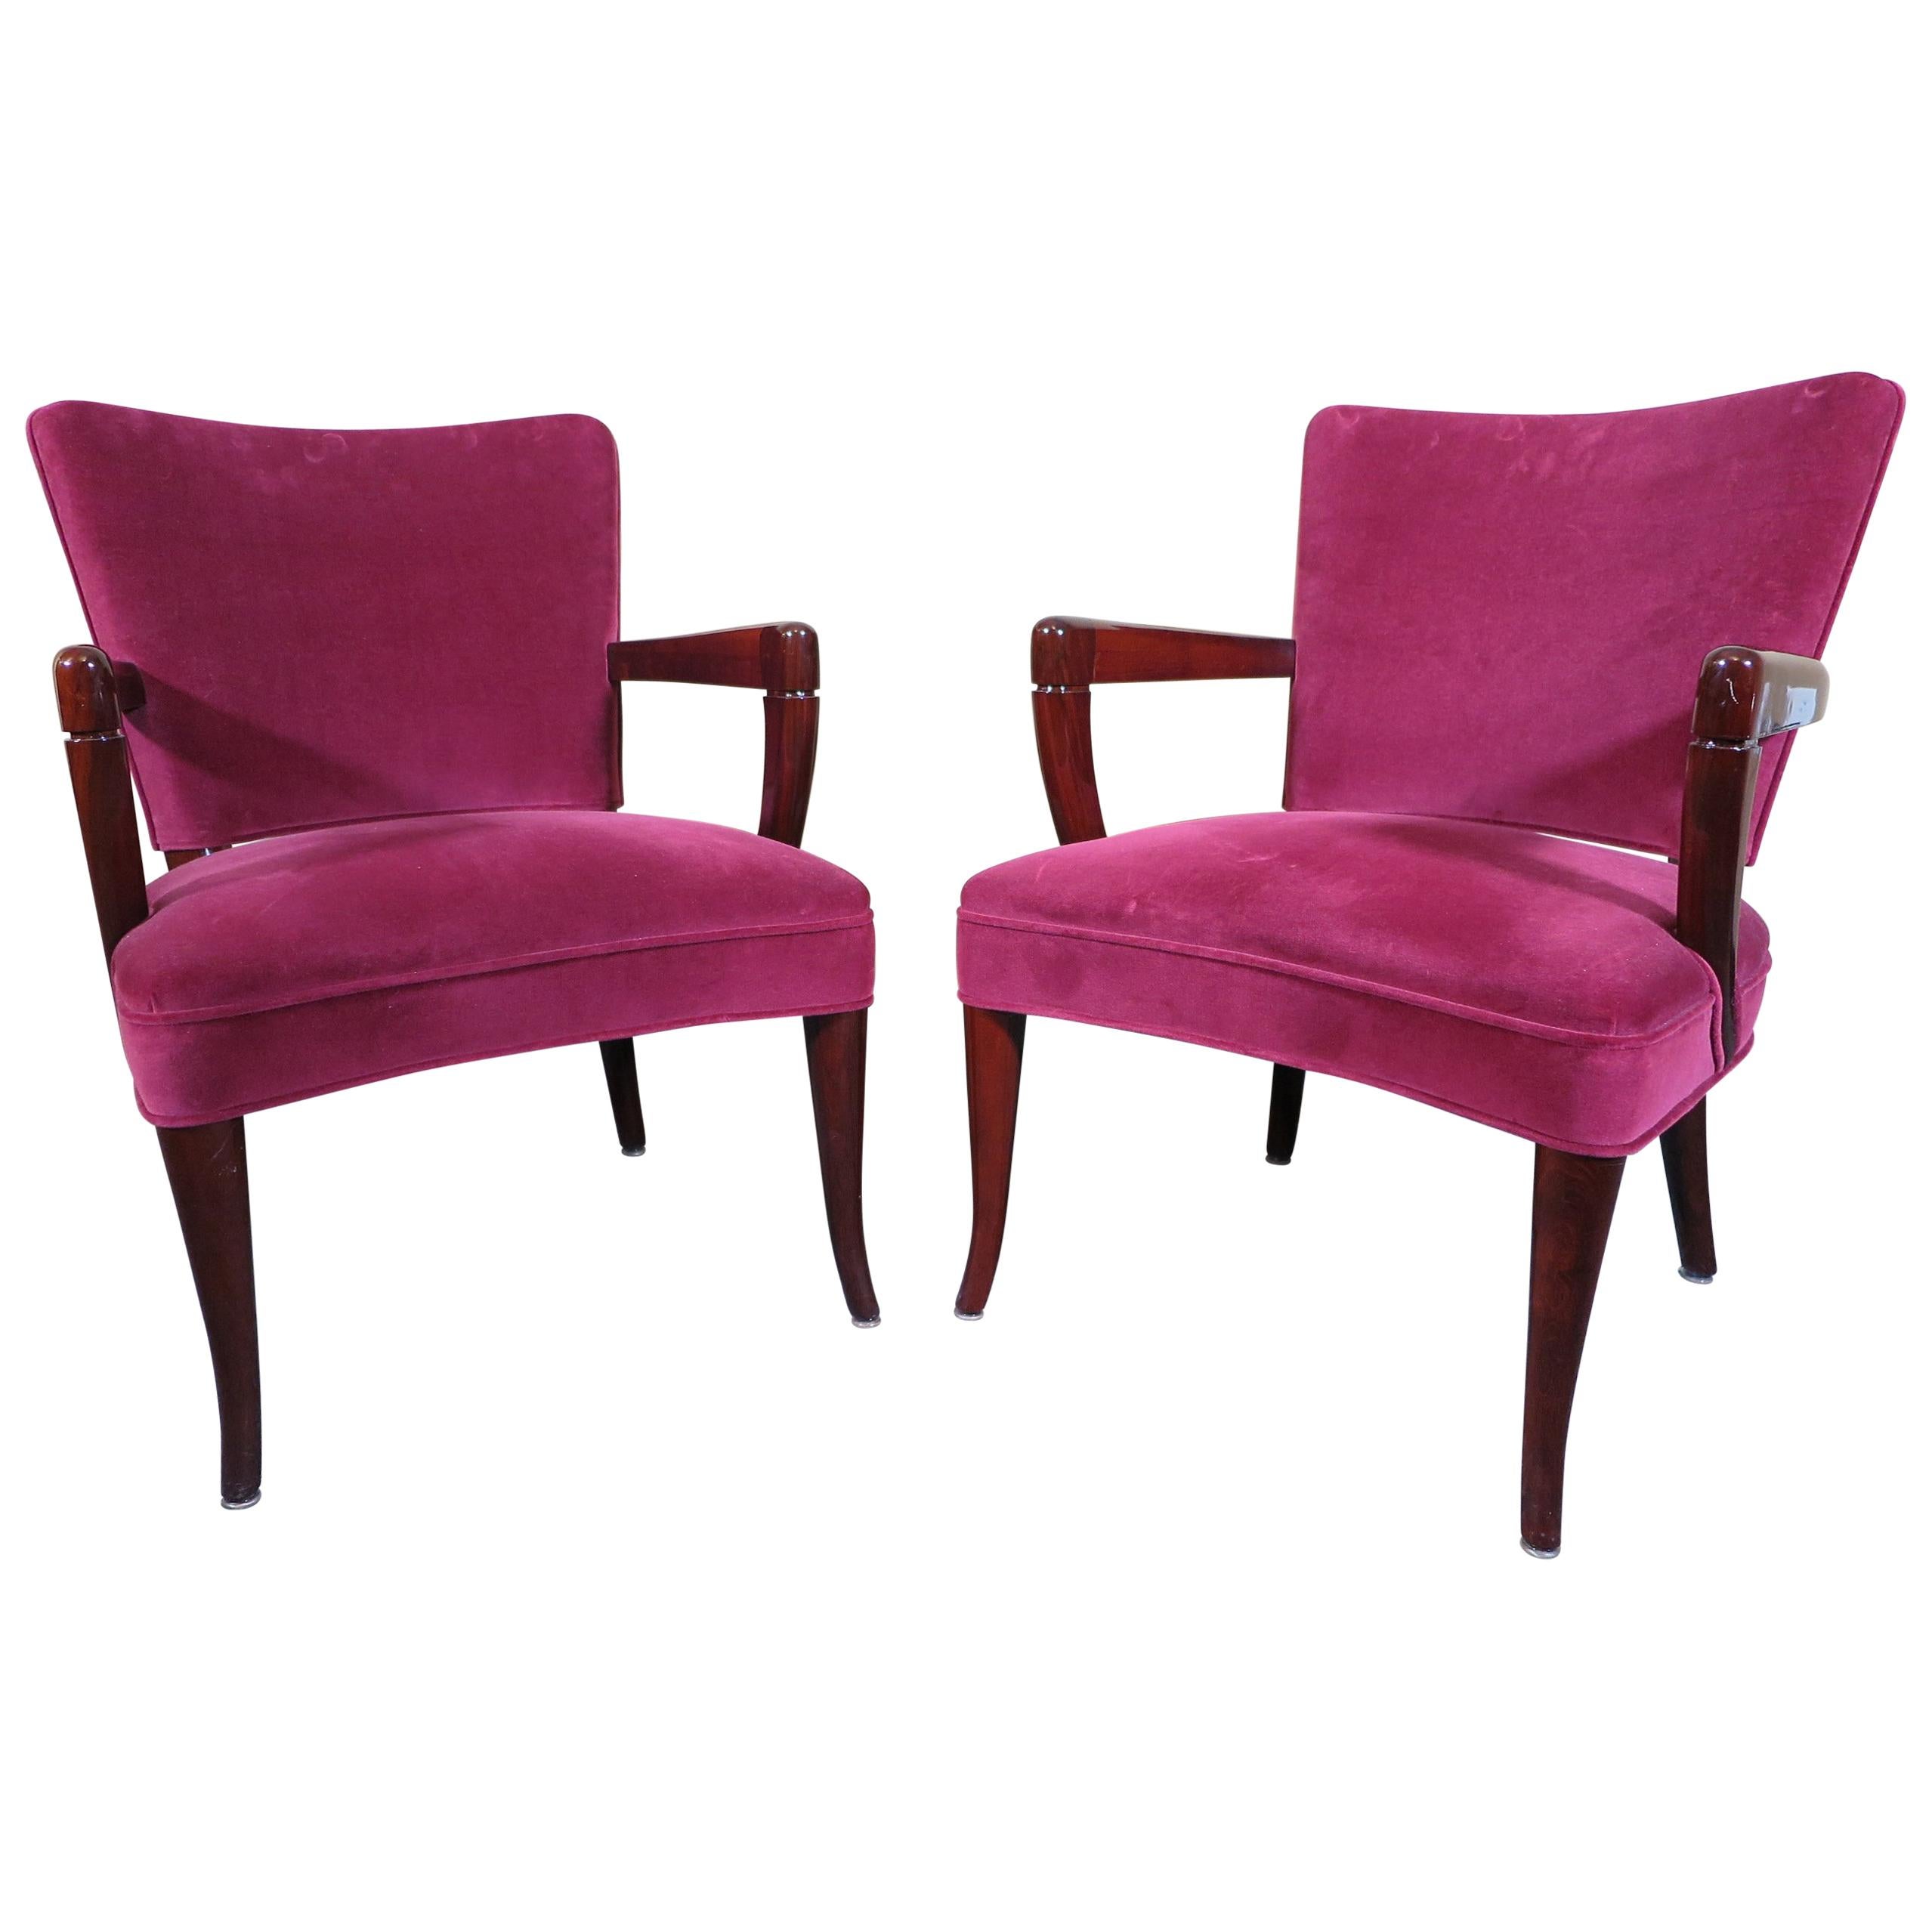 Pair of Armchairs by Widdicomb